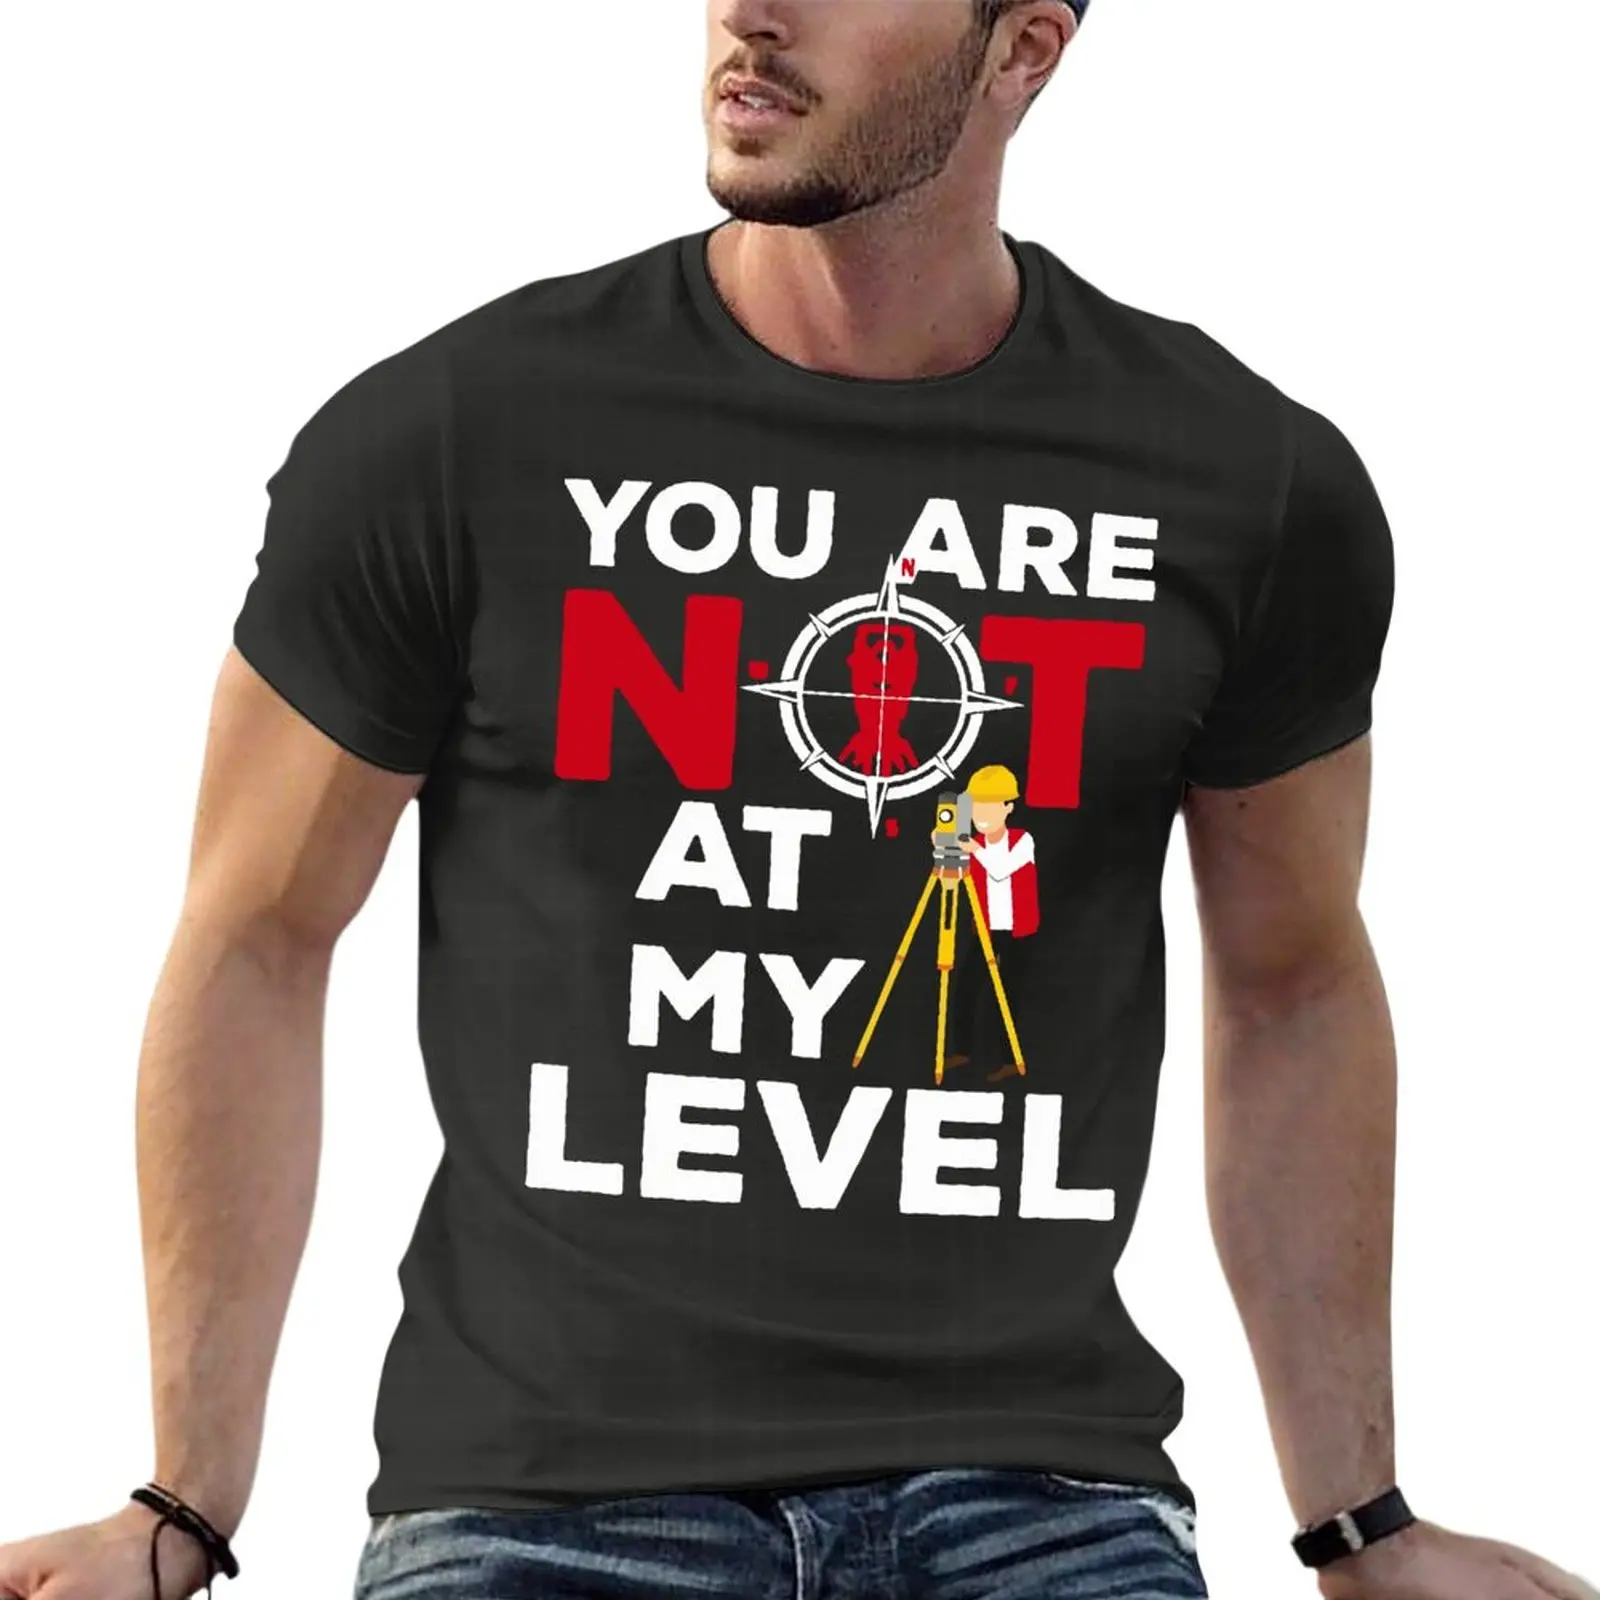 

You Are Not At My Level - Land Surveying Oversized T-Shirt Harajuku Men Clothes 100% Cotton Streetwear Large Size Top Tee